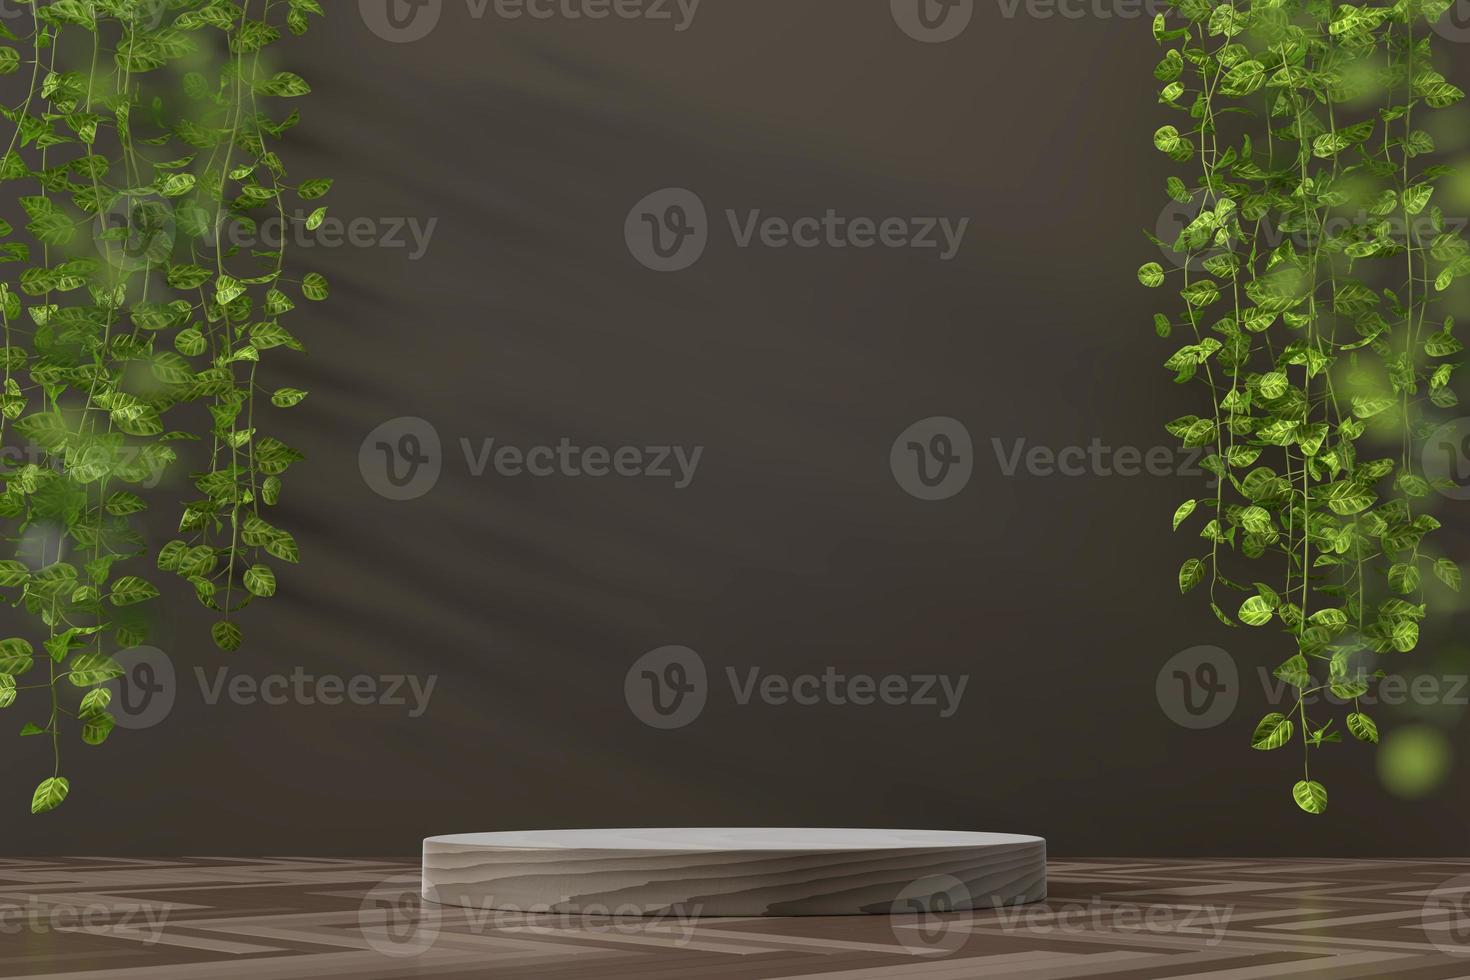 Abstract platform showcase for product display with ivy 3d render photo